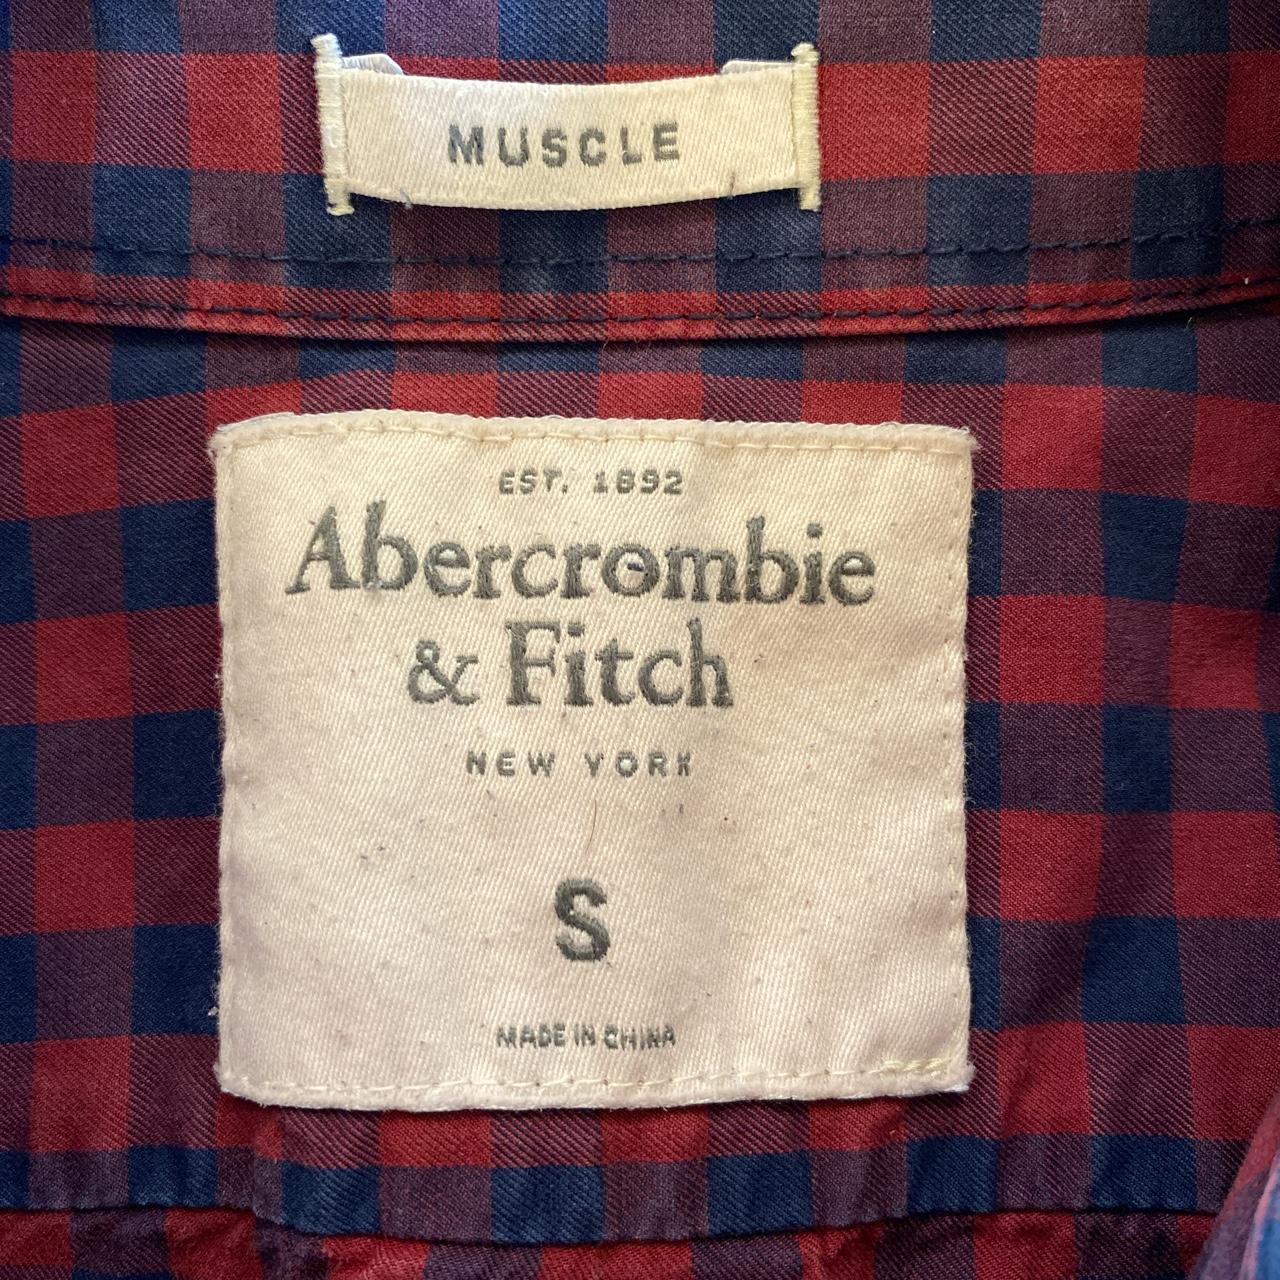 Abercrombie & Fitch Men's Blue and Red Shirt (3)